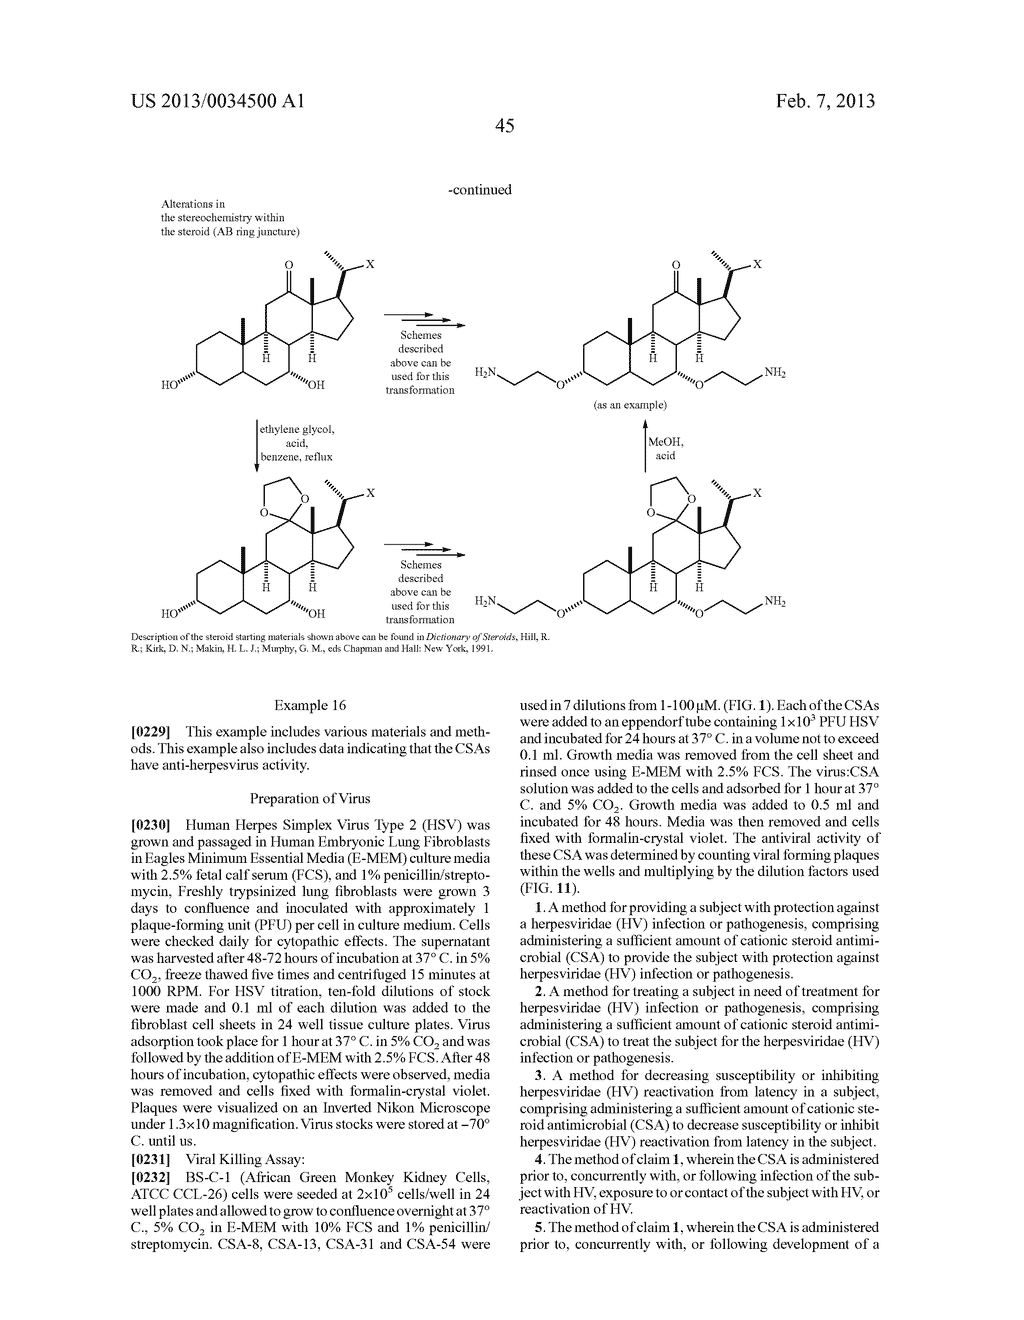 Cationic Steroid Antimicrobial Compositions and Methods of Use - diagram, schematic, and image 52